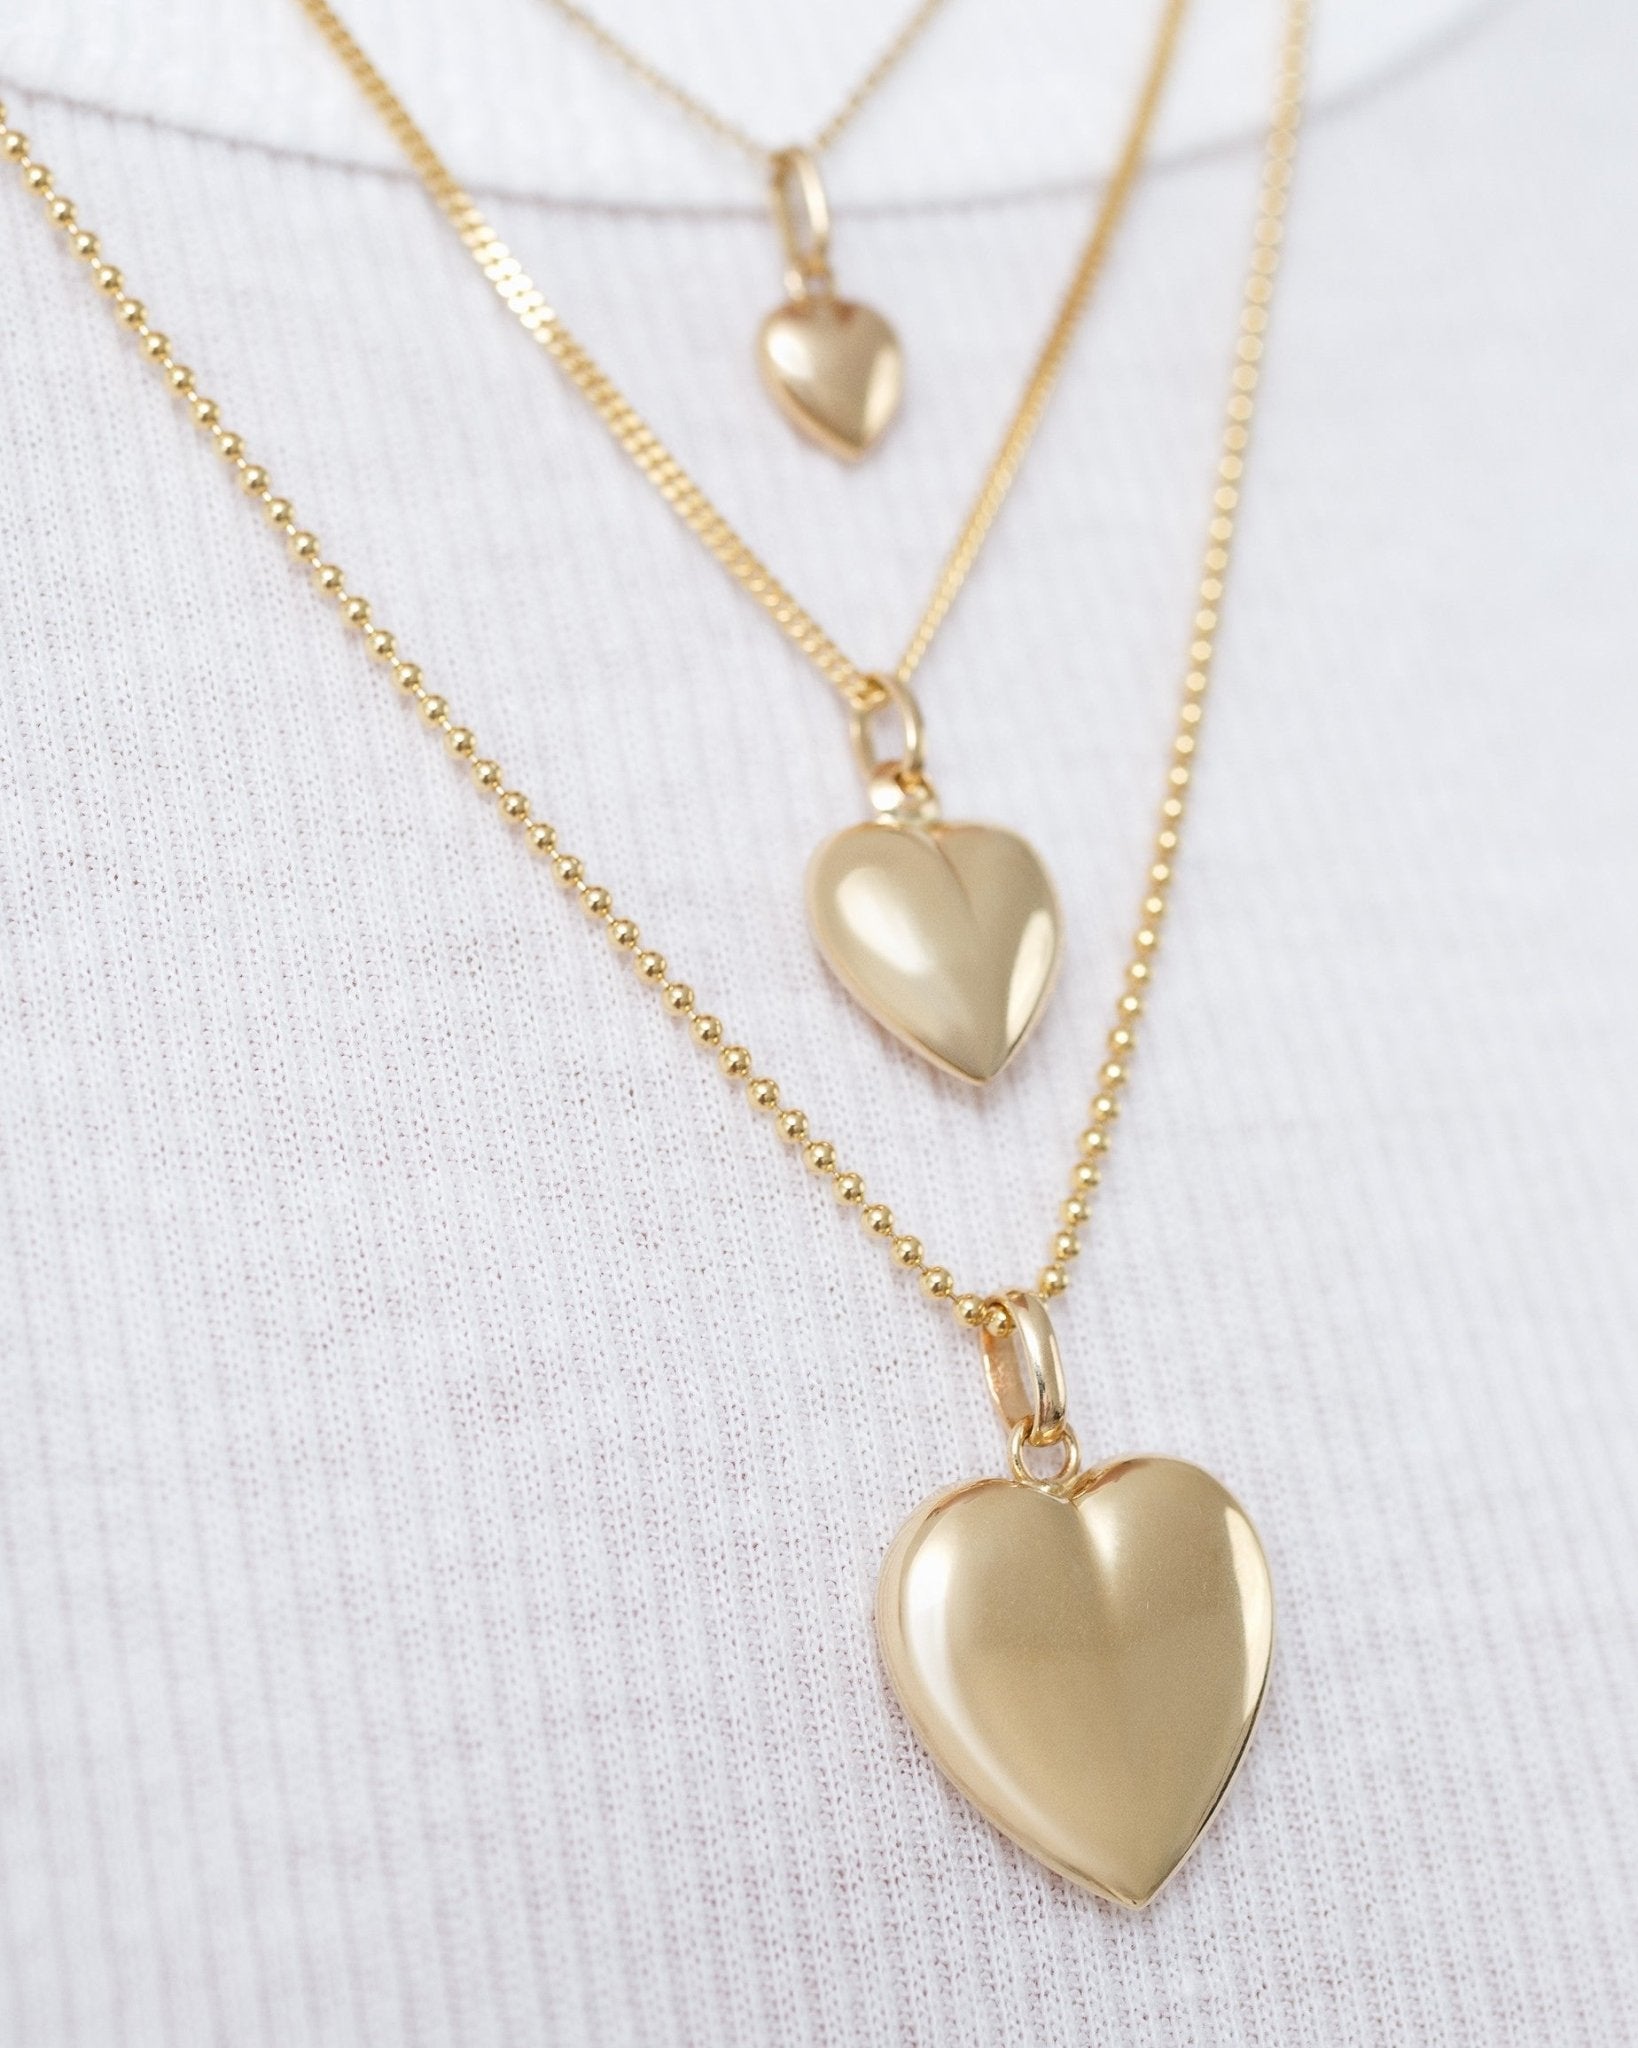 tiny gold puffed heart necklace-small gold heart necklace-gold | Gold heart  necklace, Puffed heart, Small heart necklace